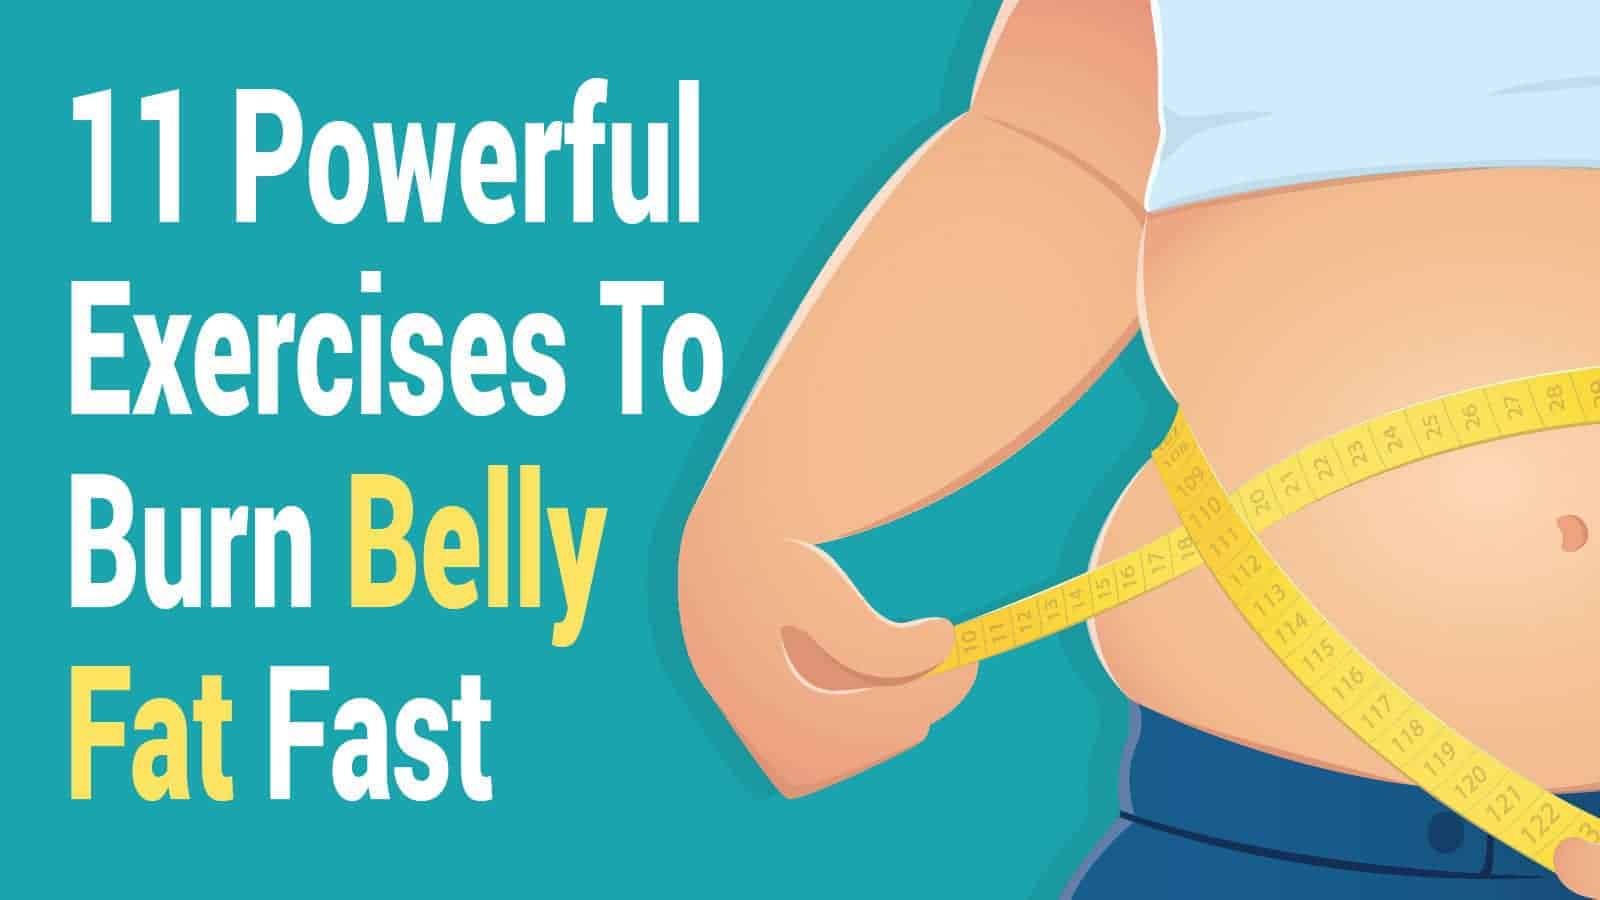 11 Powerful Exercises To Burn Belly Fat Fast